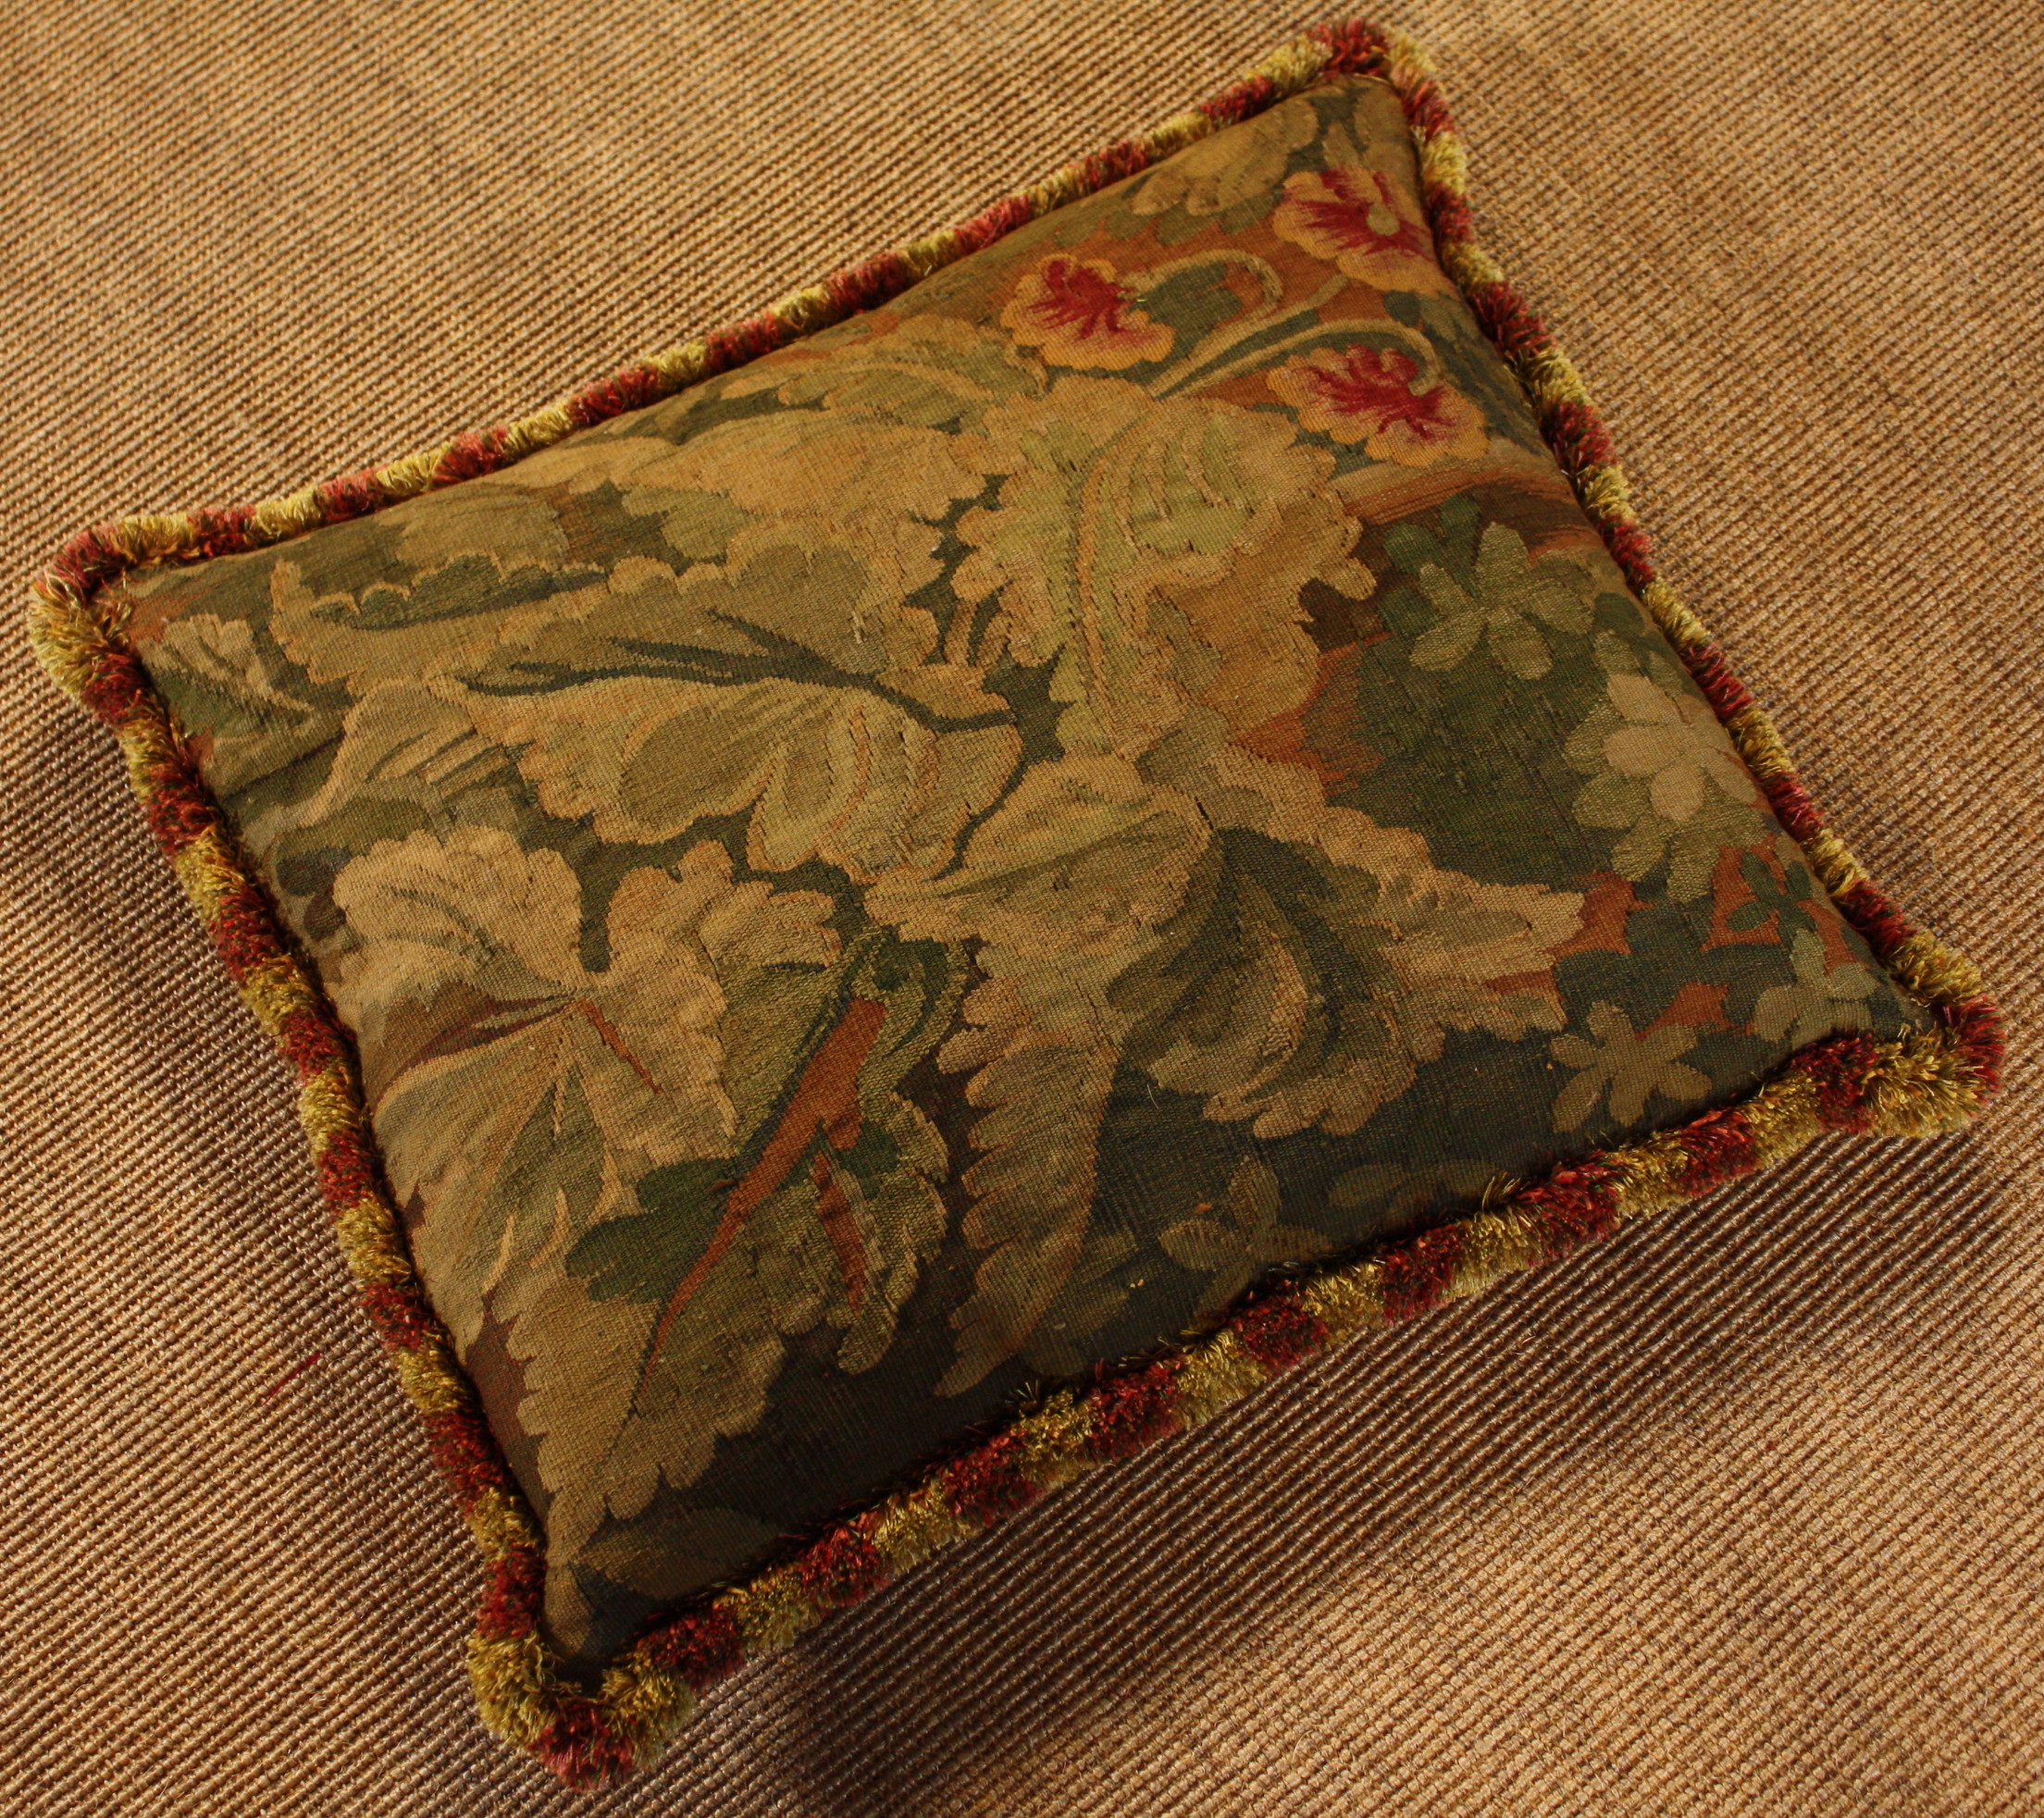 A Large feather-filled Tapestry Cushion.  The 18th century Gobelin cover woven with foliage and